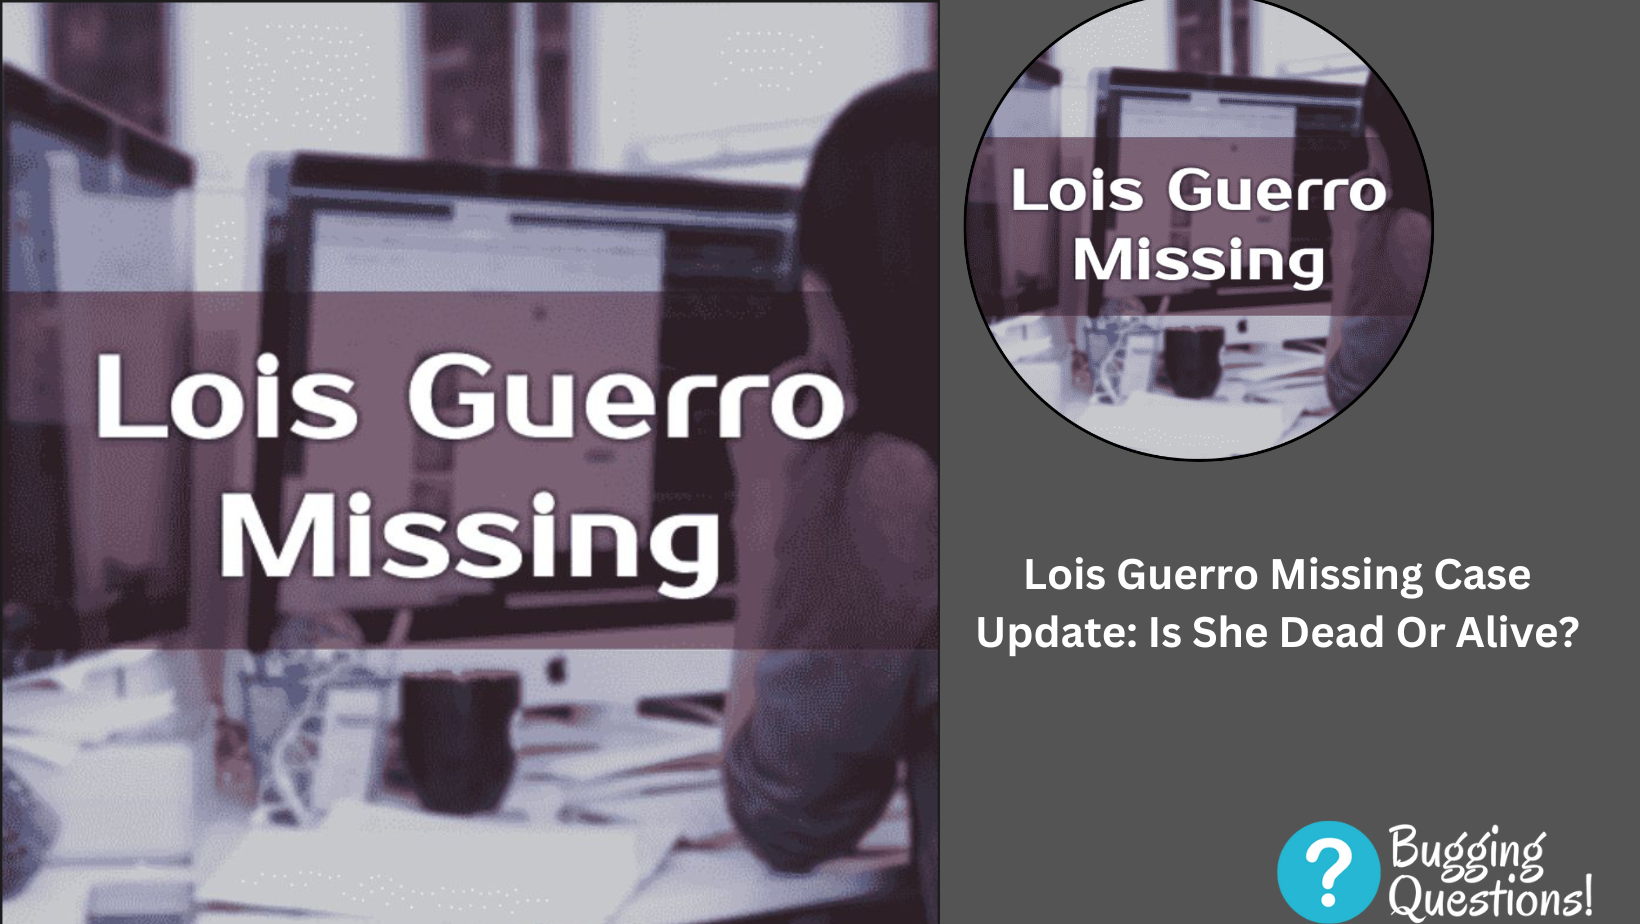 Lois Guerro Missing Case Update: Is She Dead Or Alive?